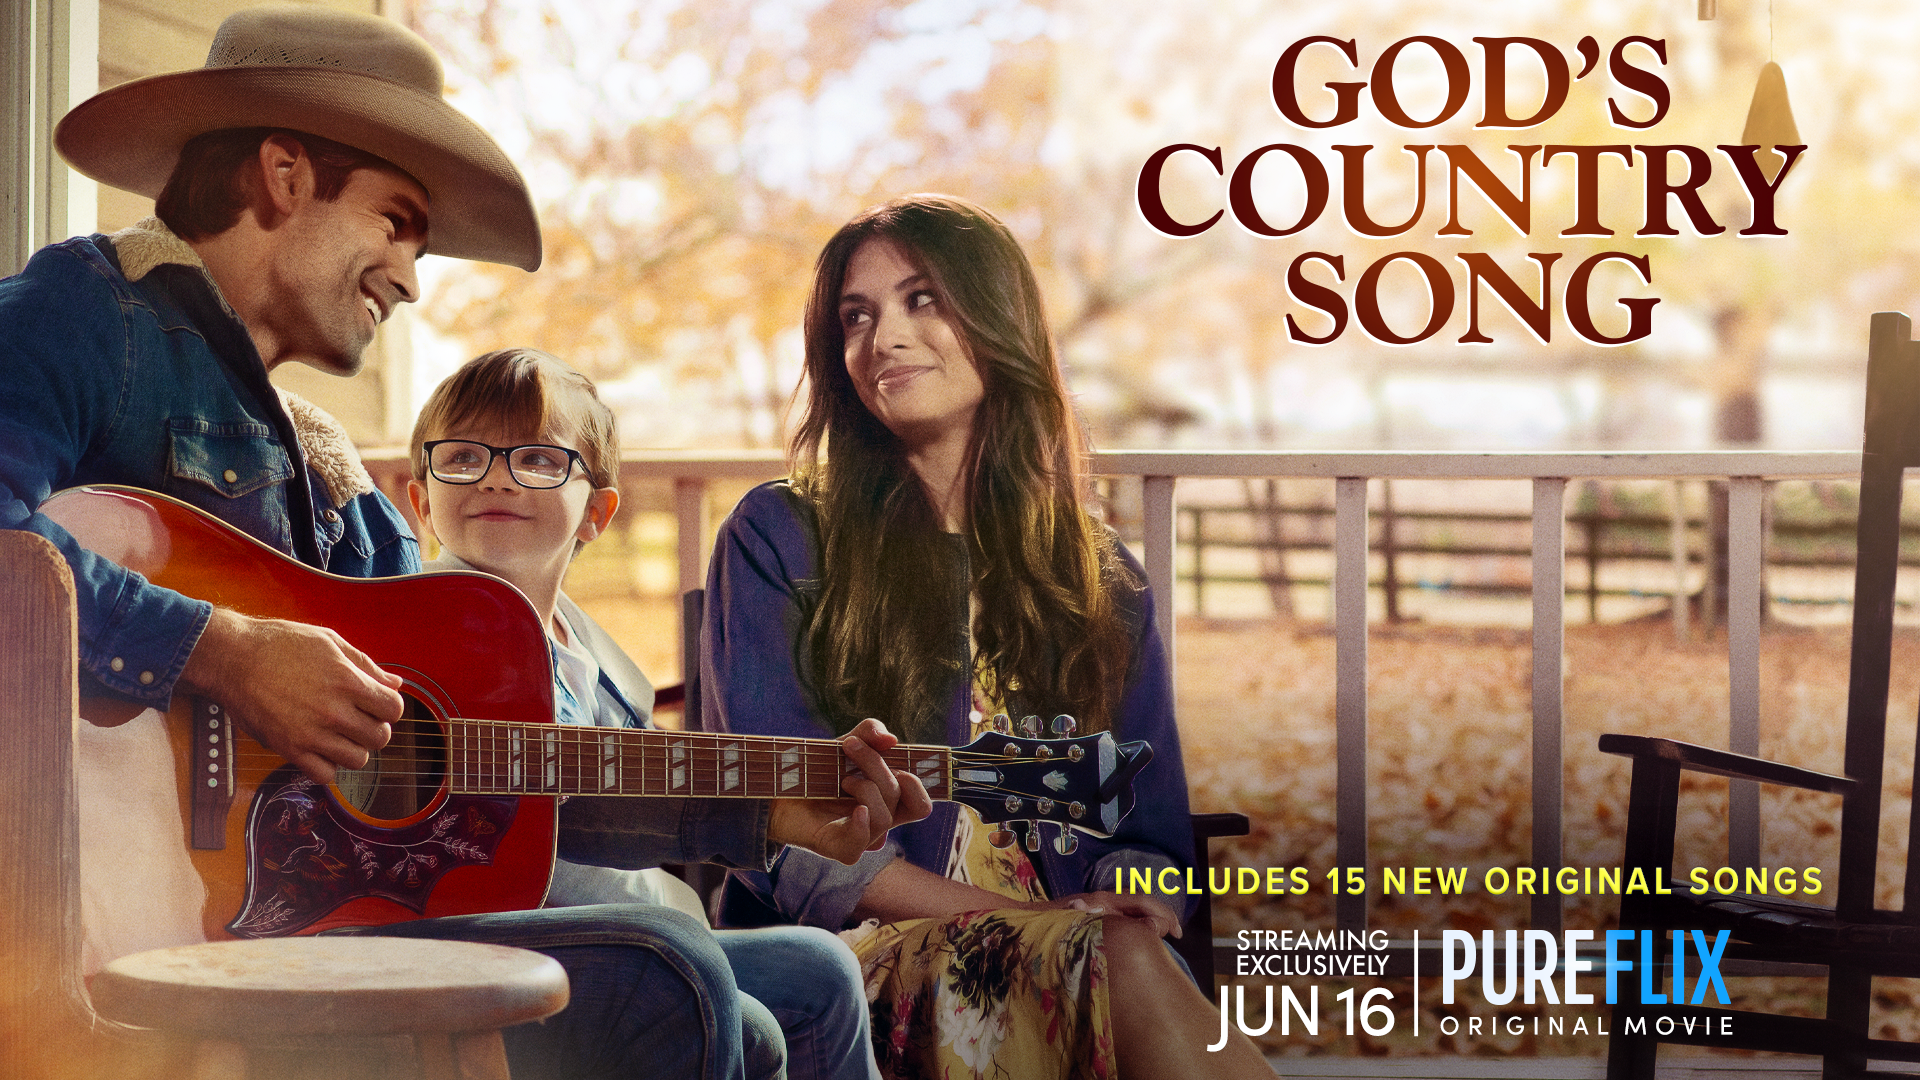 gods country song pure flix original movie about fatherhood